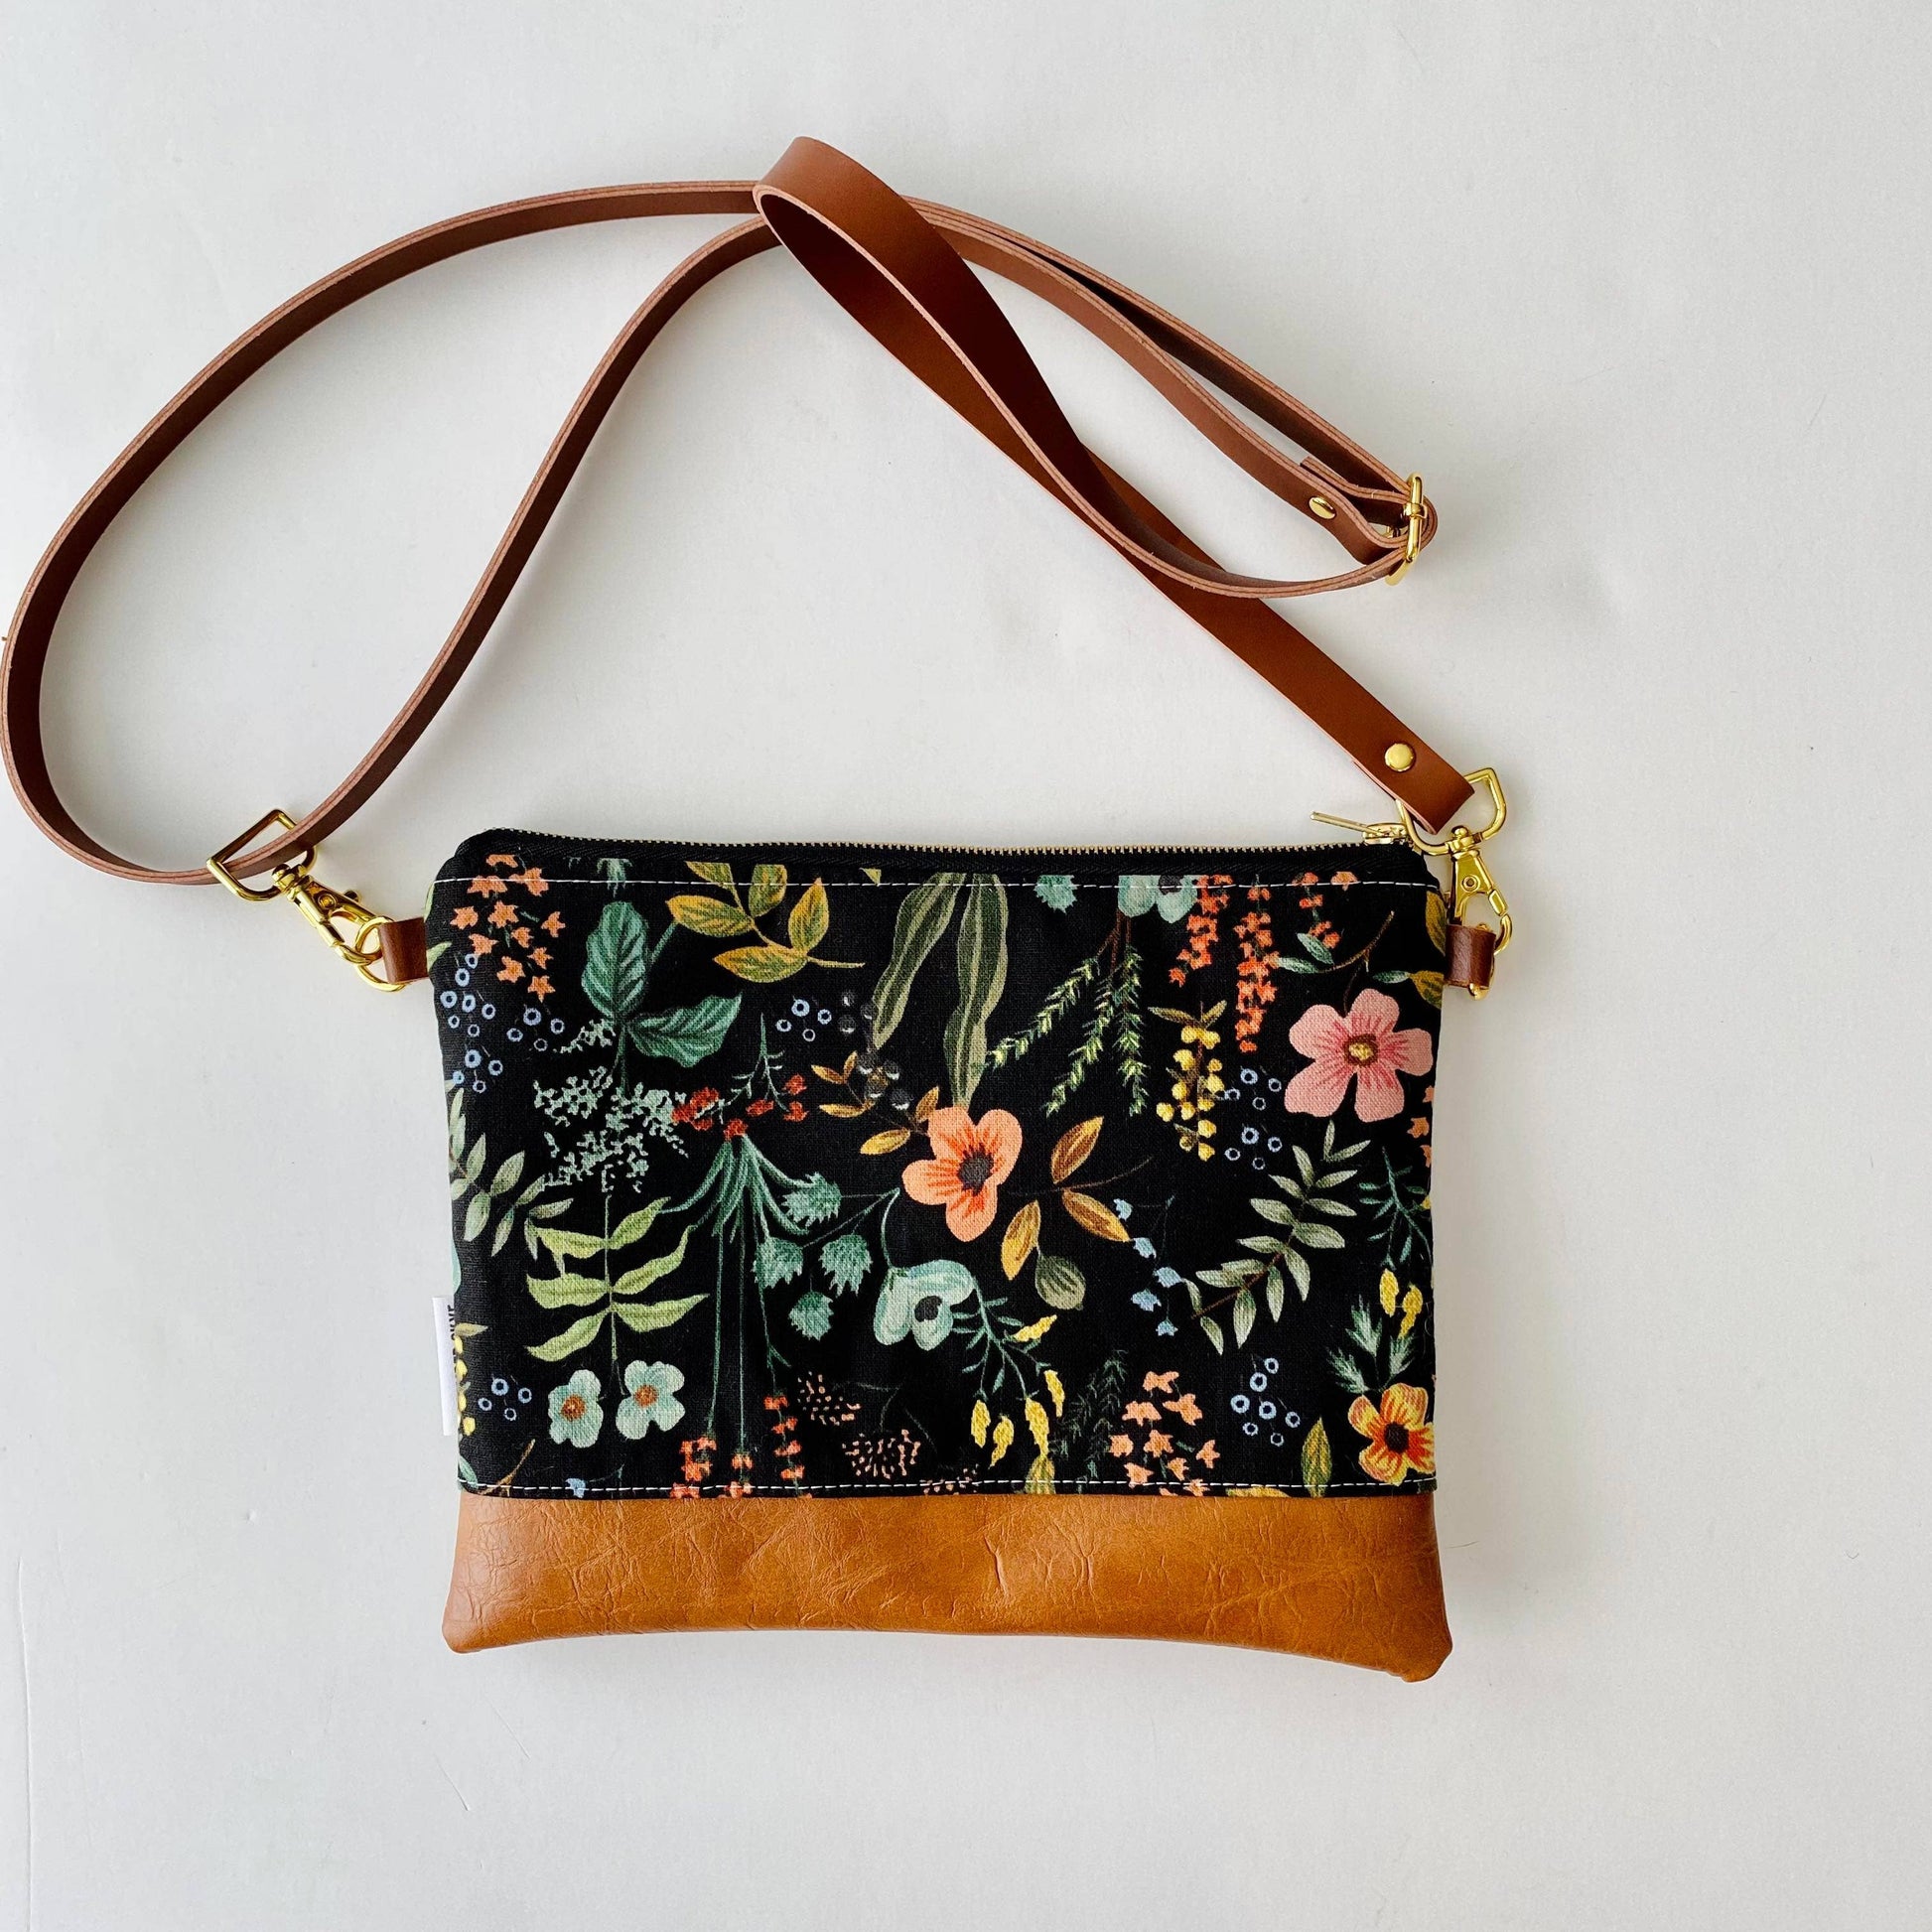 Small crossbody bag in rifle paper black botanical floral Core September Skye Bags & Accessories